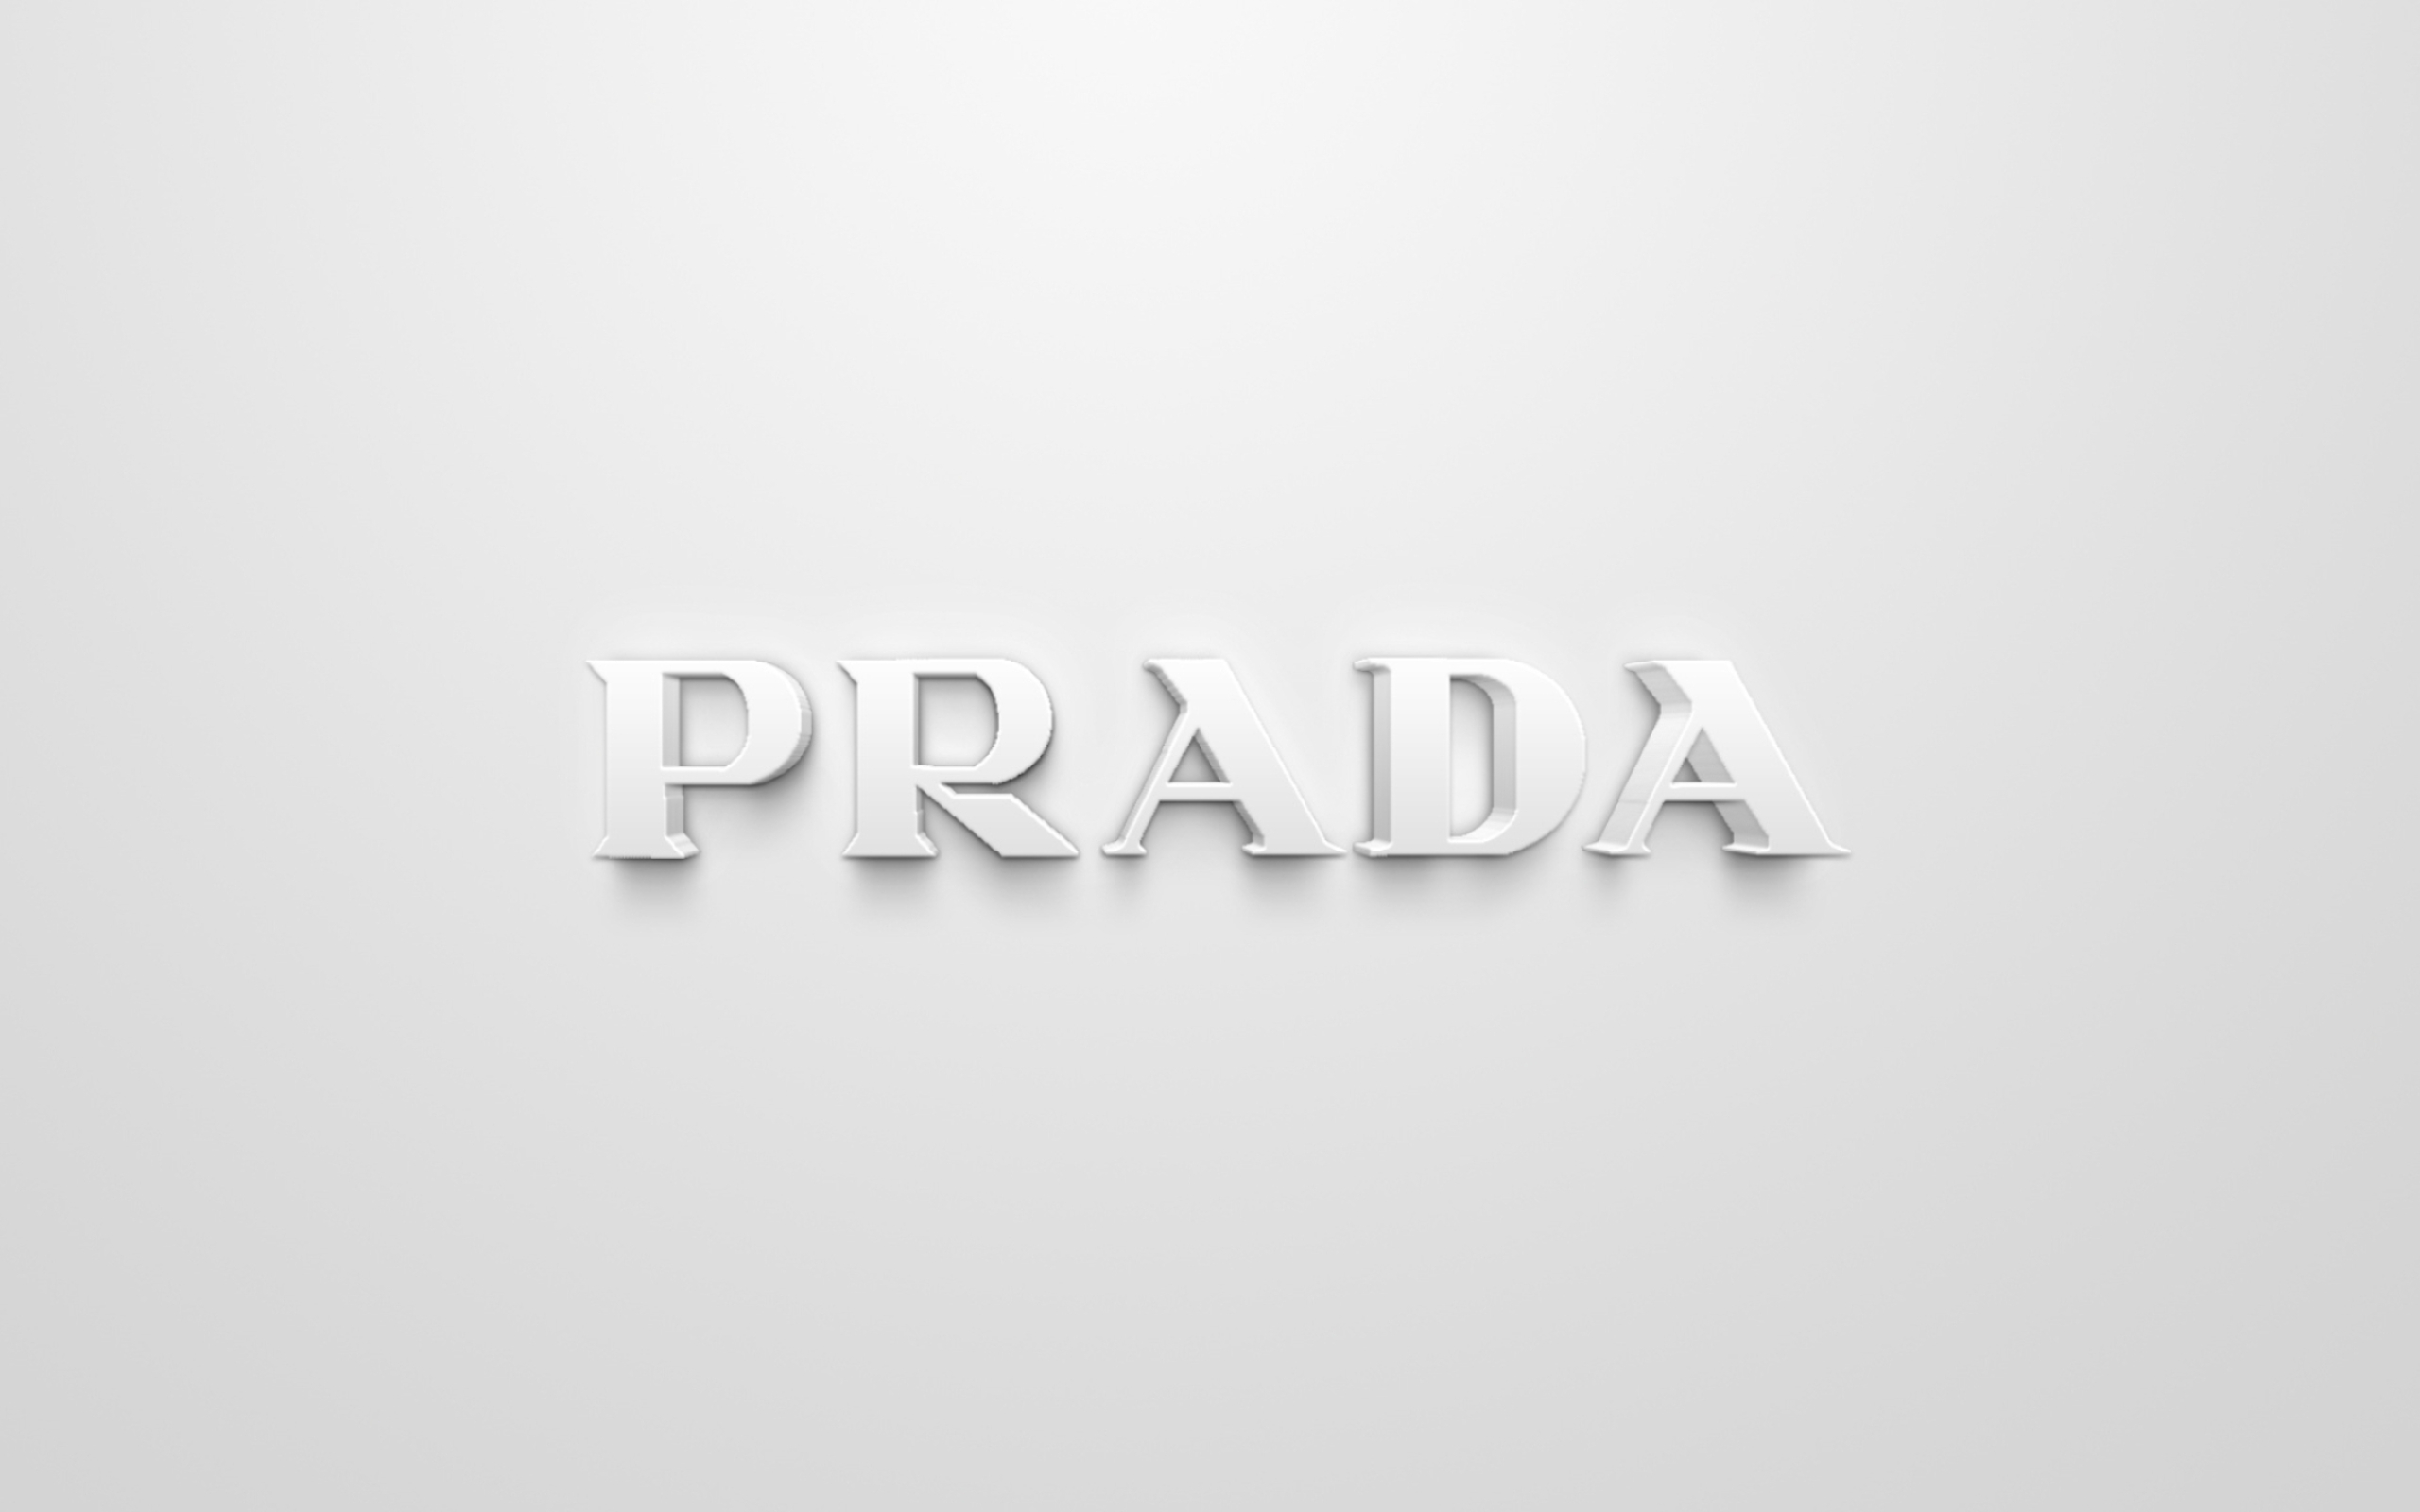 Prada: A holding company, The manufacture and distribution of luxury goods. 2560x1600 HD Wallpaper.